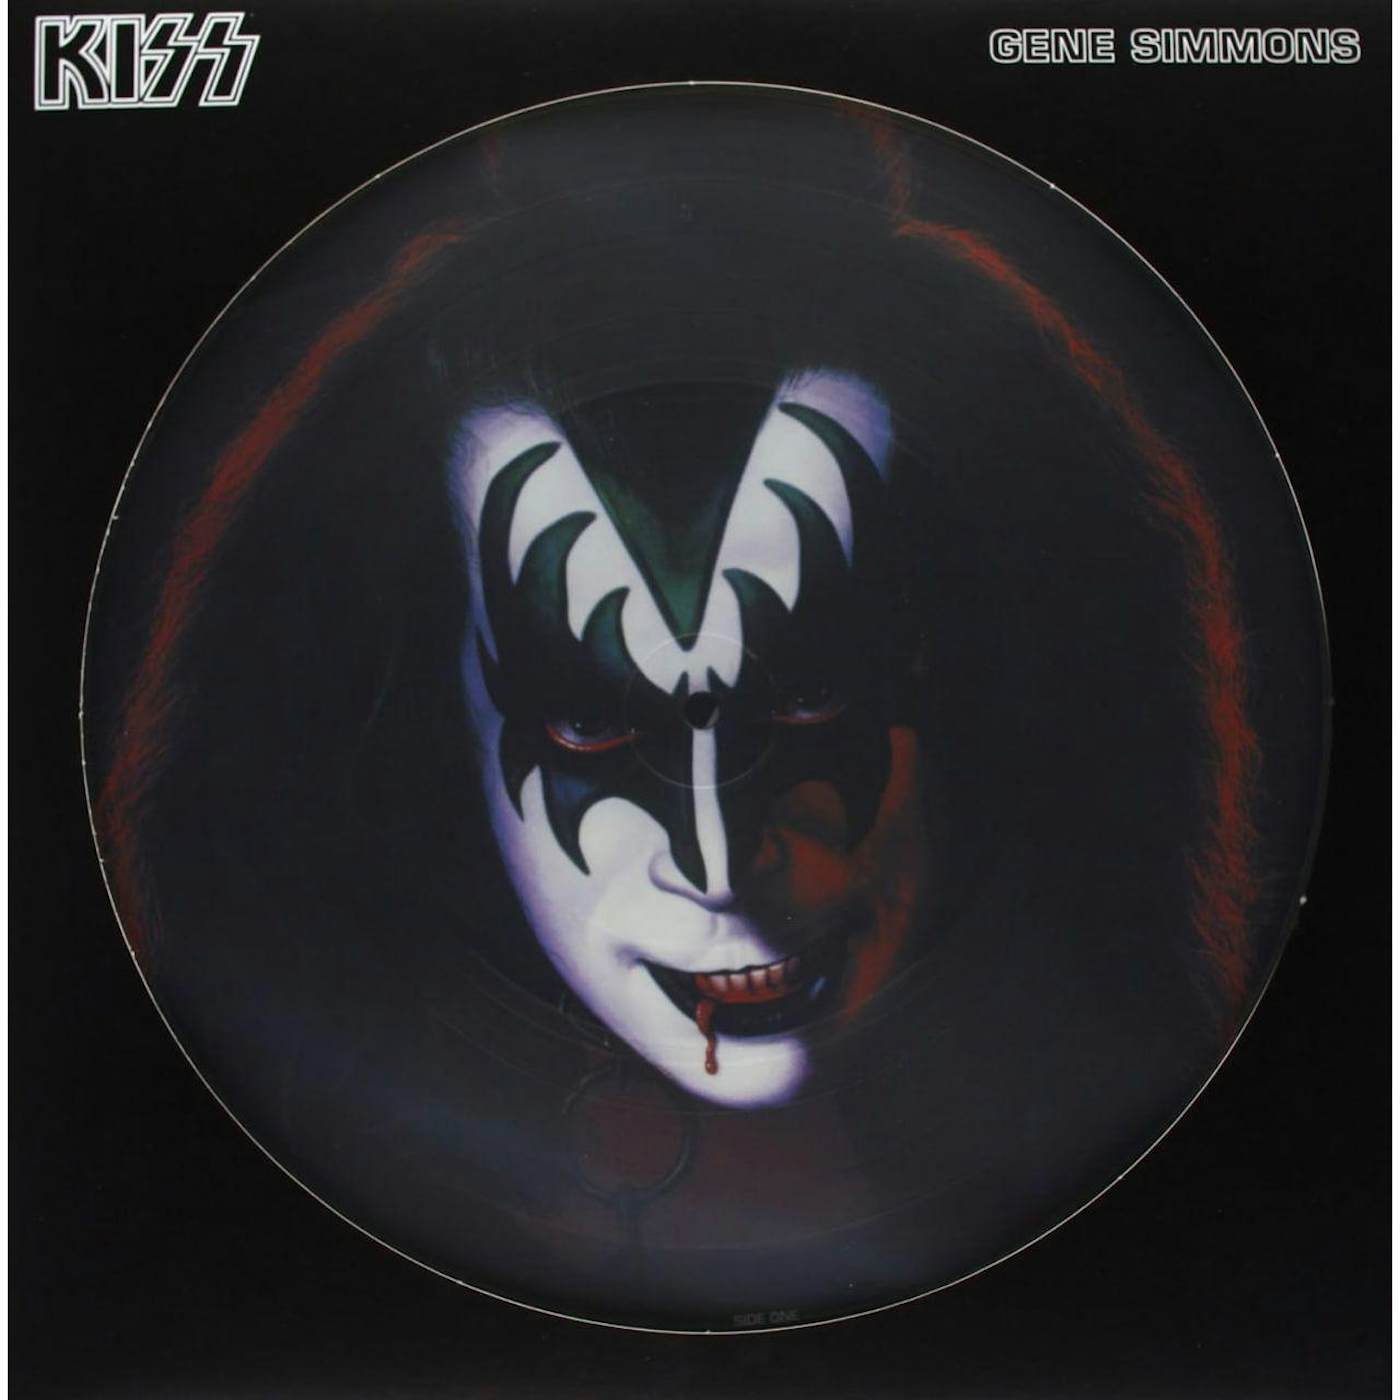 KISS Gene Simmons (Picture Disc) Vinyl Record